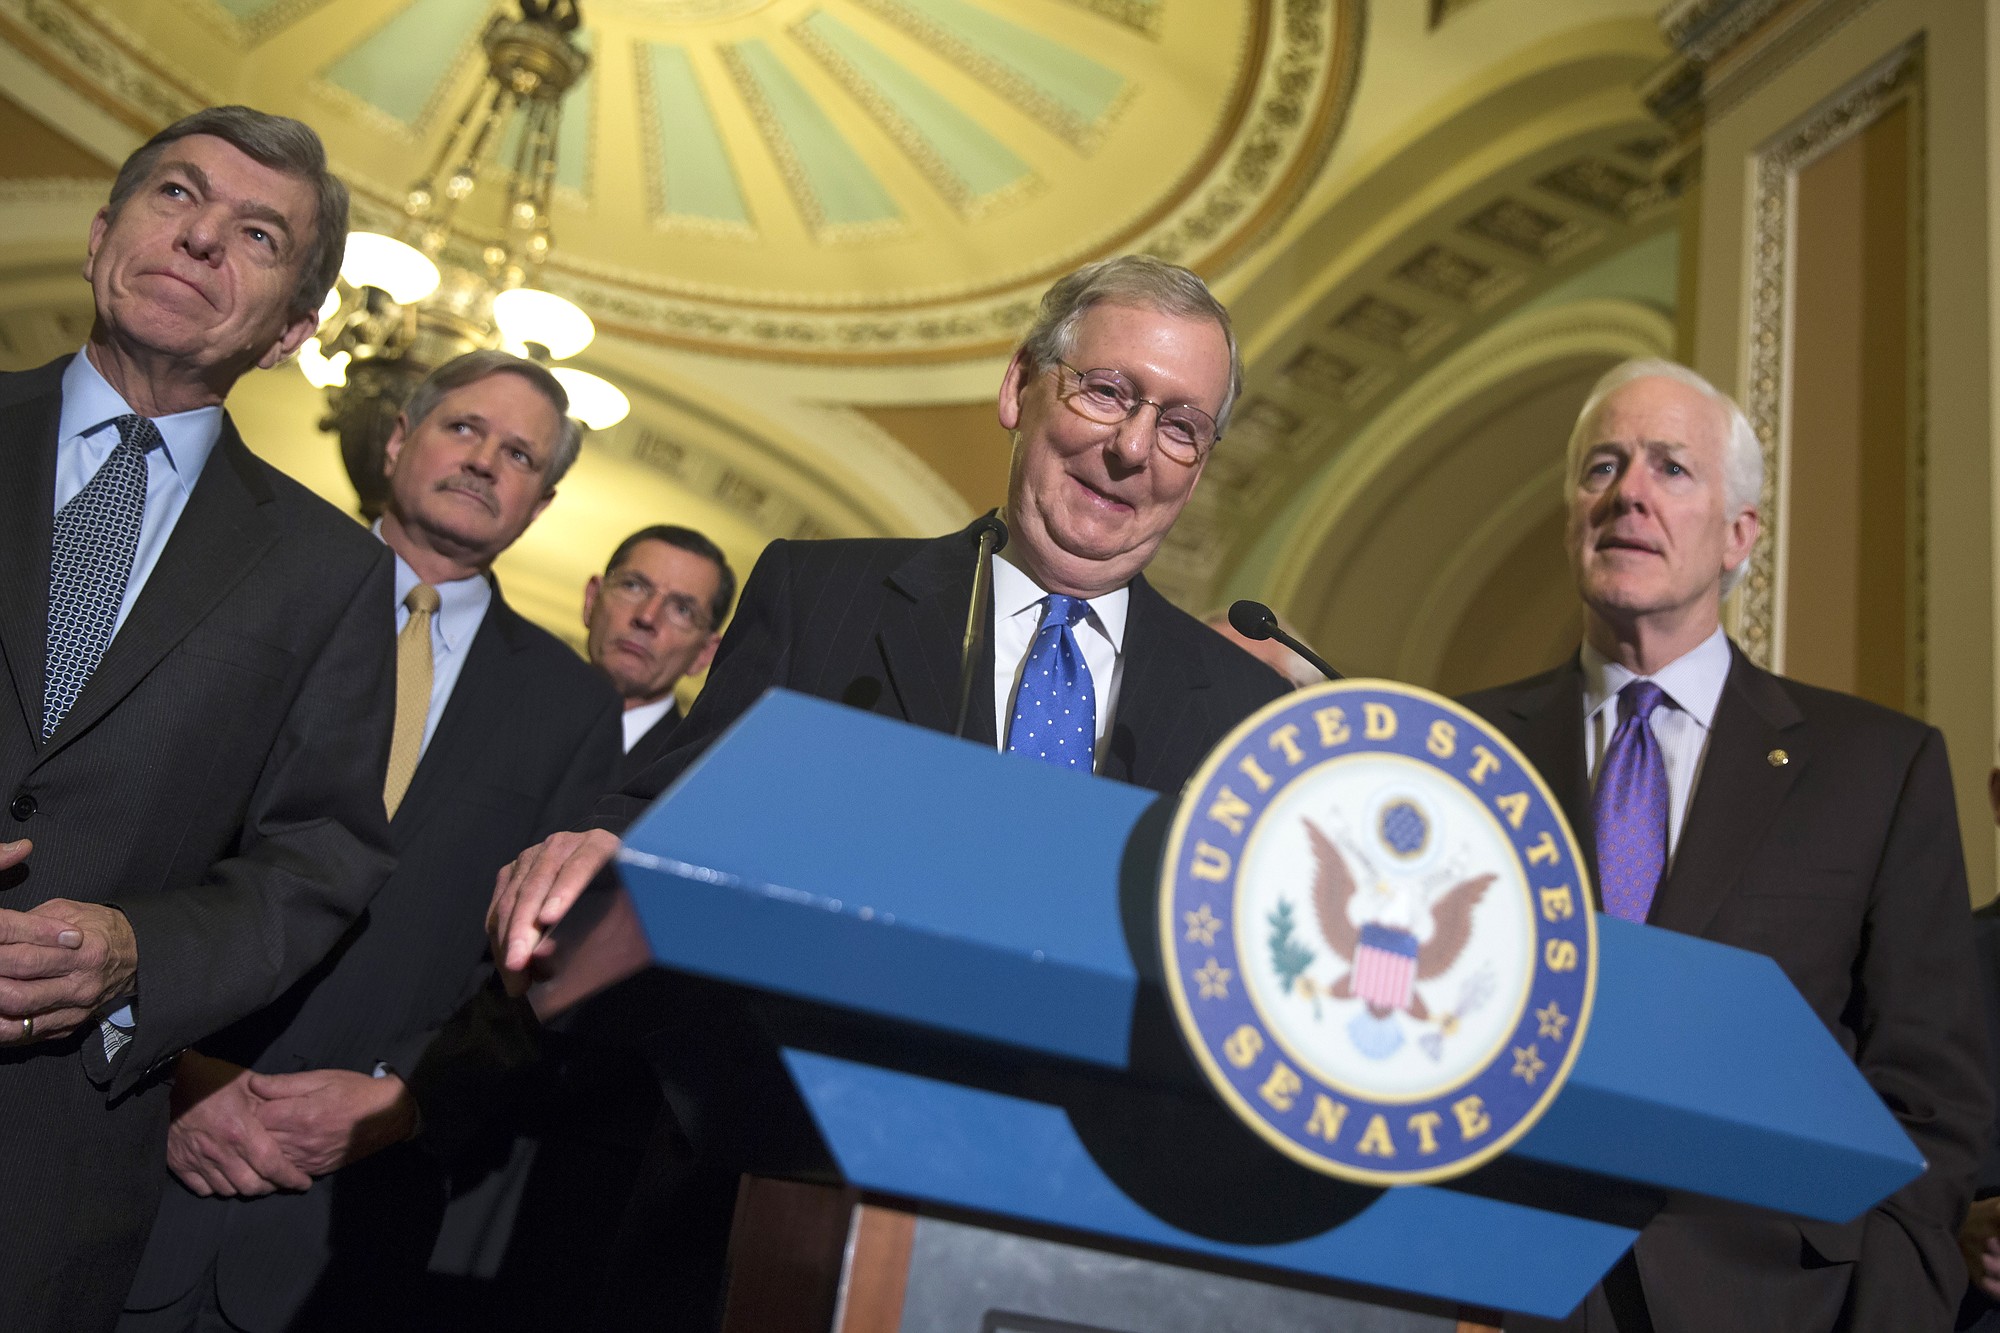 Senate Minority Leader Mitch McConnell of Kentucky smiles Thursday during a news conference on Capitol Hill in Washington after Senate Republicans voted on leadership positions for the 114th Congress. From left are, Sen. Roy Blunt, R-Mo., Sen. John Hoeven, R-N.D., Sen. John Barrasso, R-Wyo., McConnell and Senate Minority Whip John Cornyn of Texas.